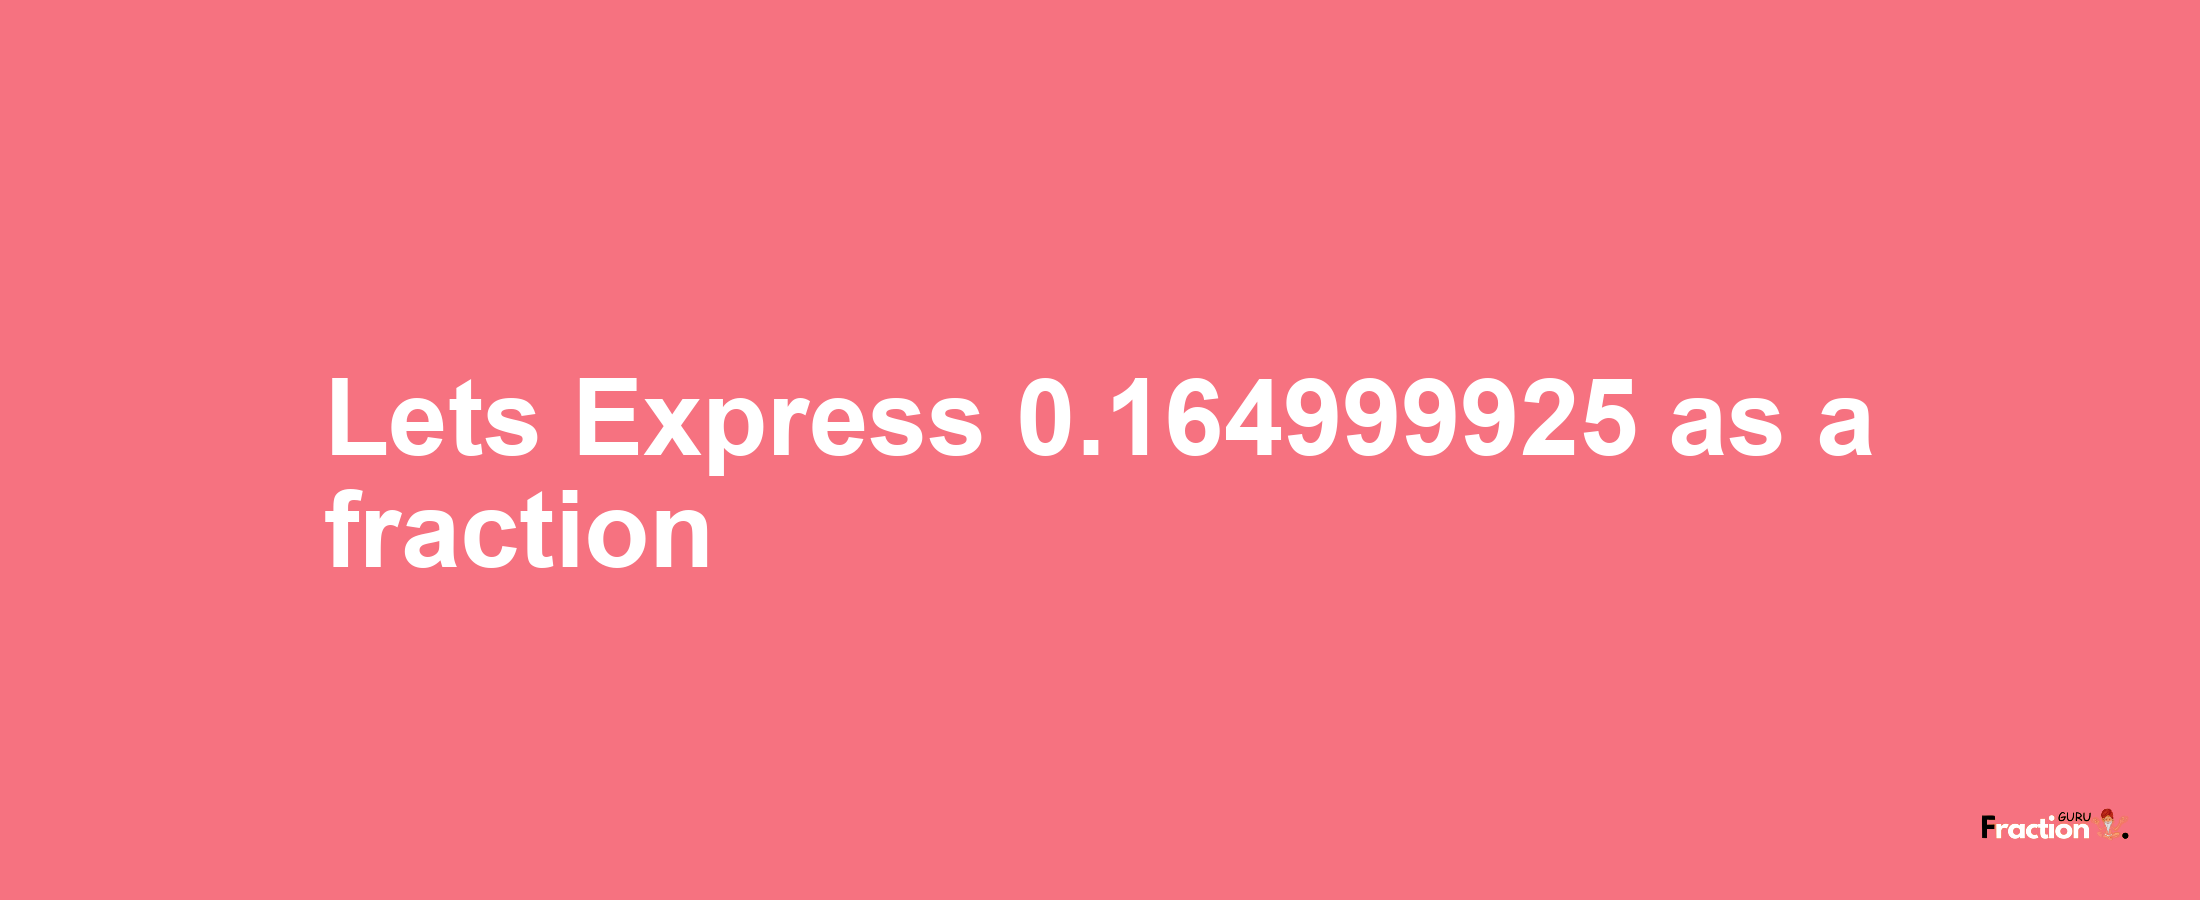 Lets Express 0.164999925 as afraction